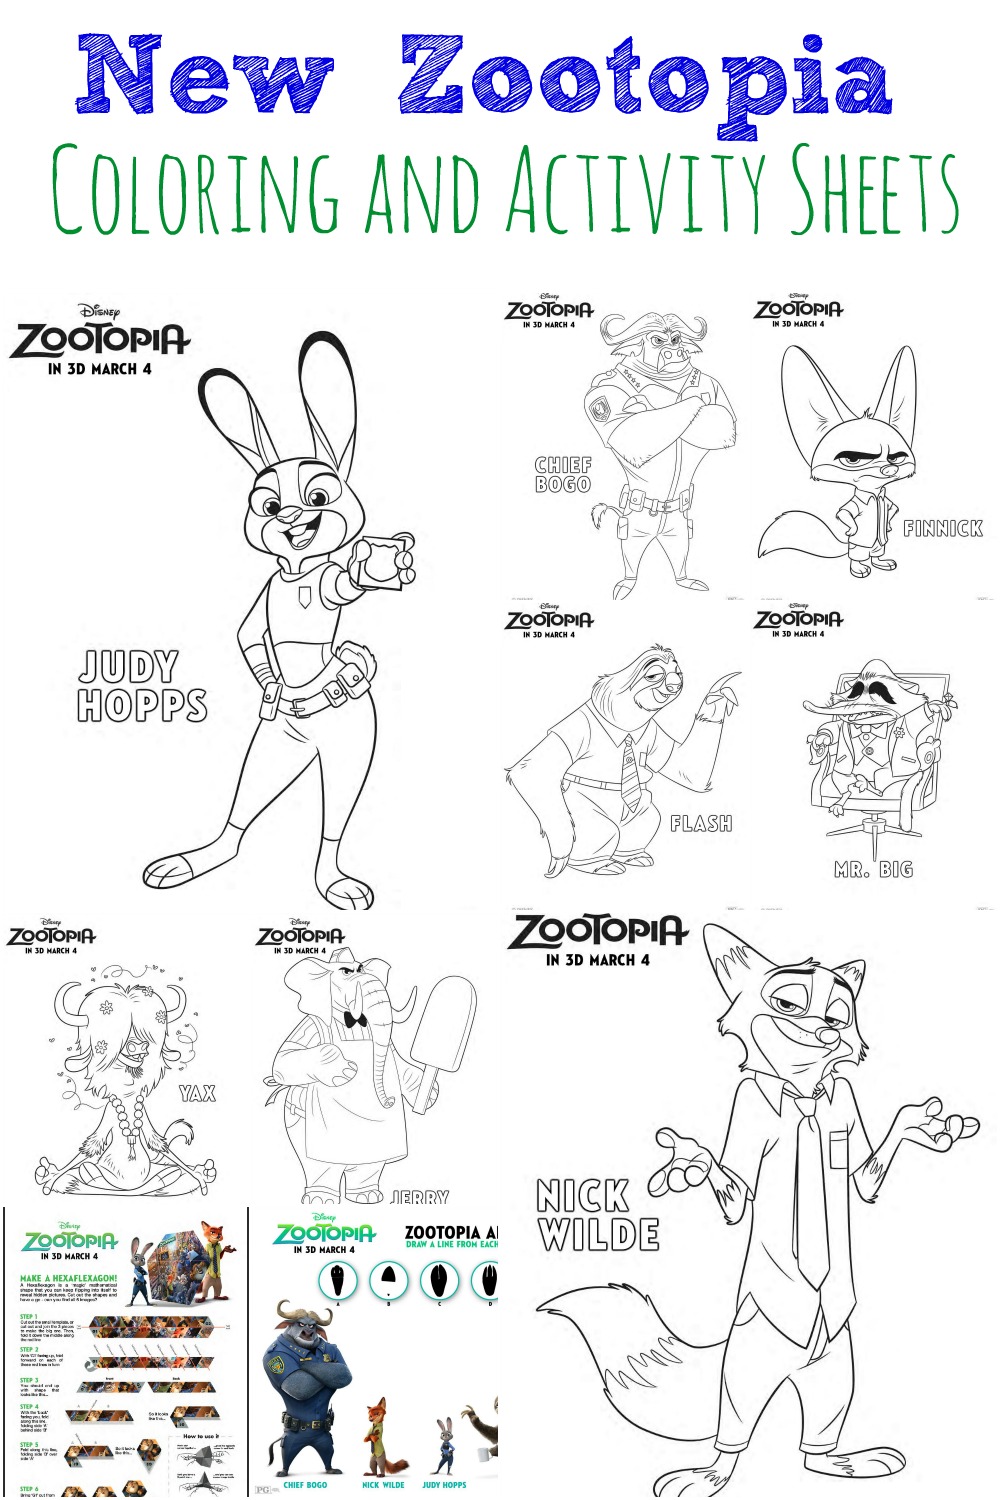 New zootopia coloring and activity sheets